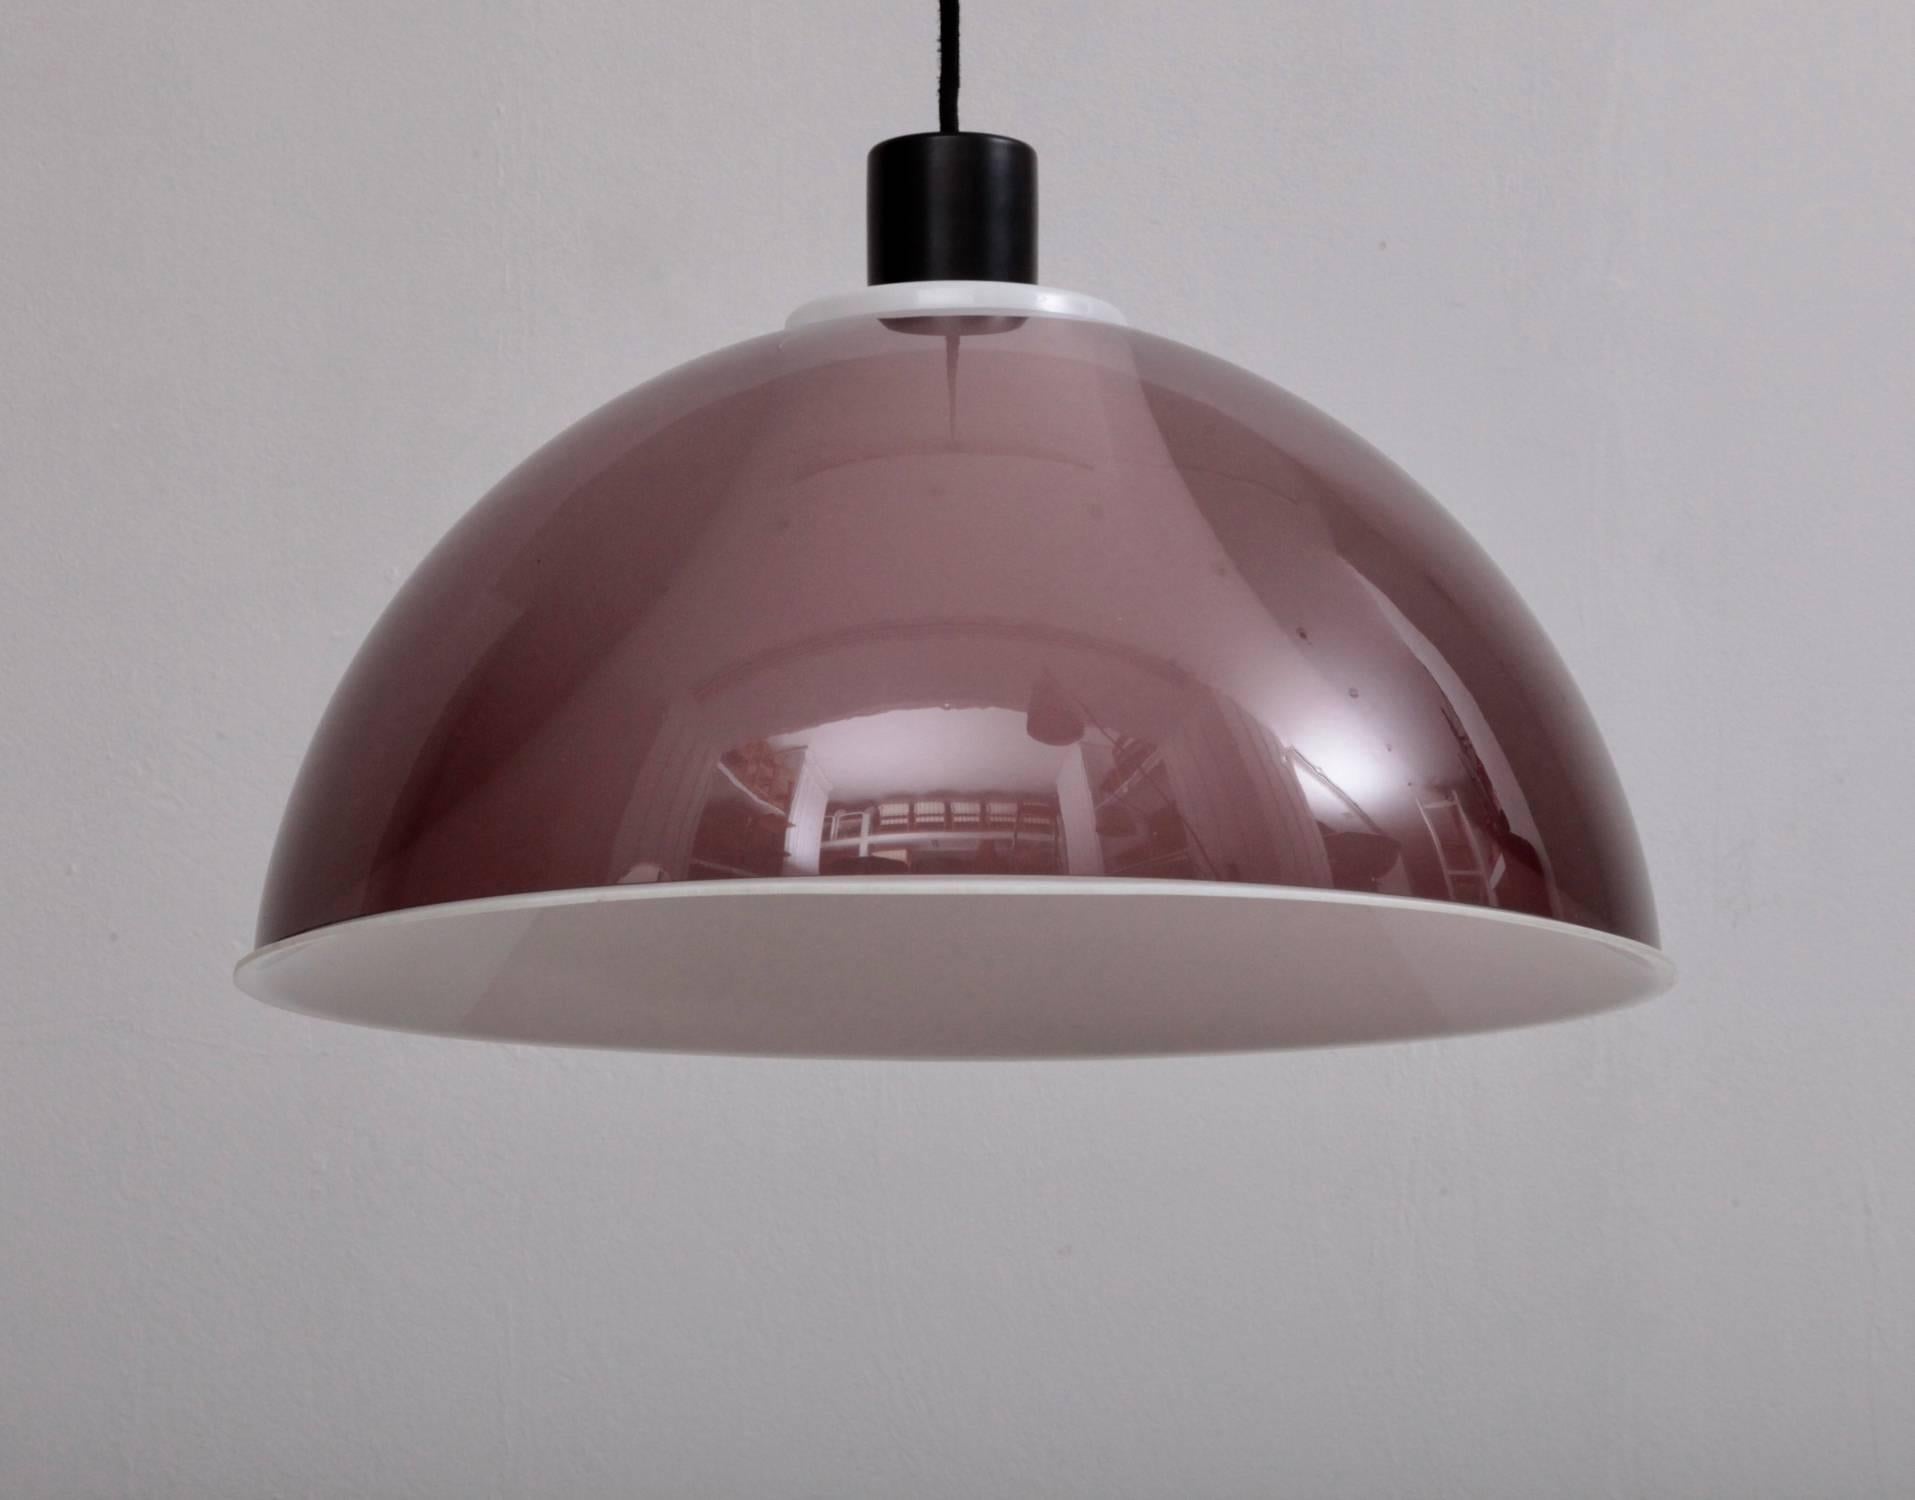 Purple version of the Stilux pendant lamp. Signed and with original canopy in excellent condition.
To be on the safe side, the lamp should be checked locally by a specialist concerning local requirements.

